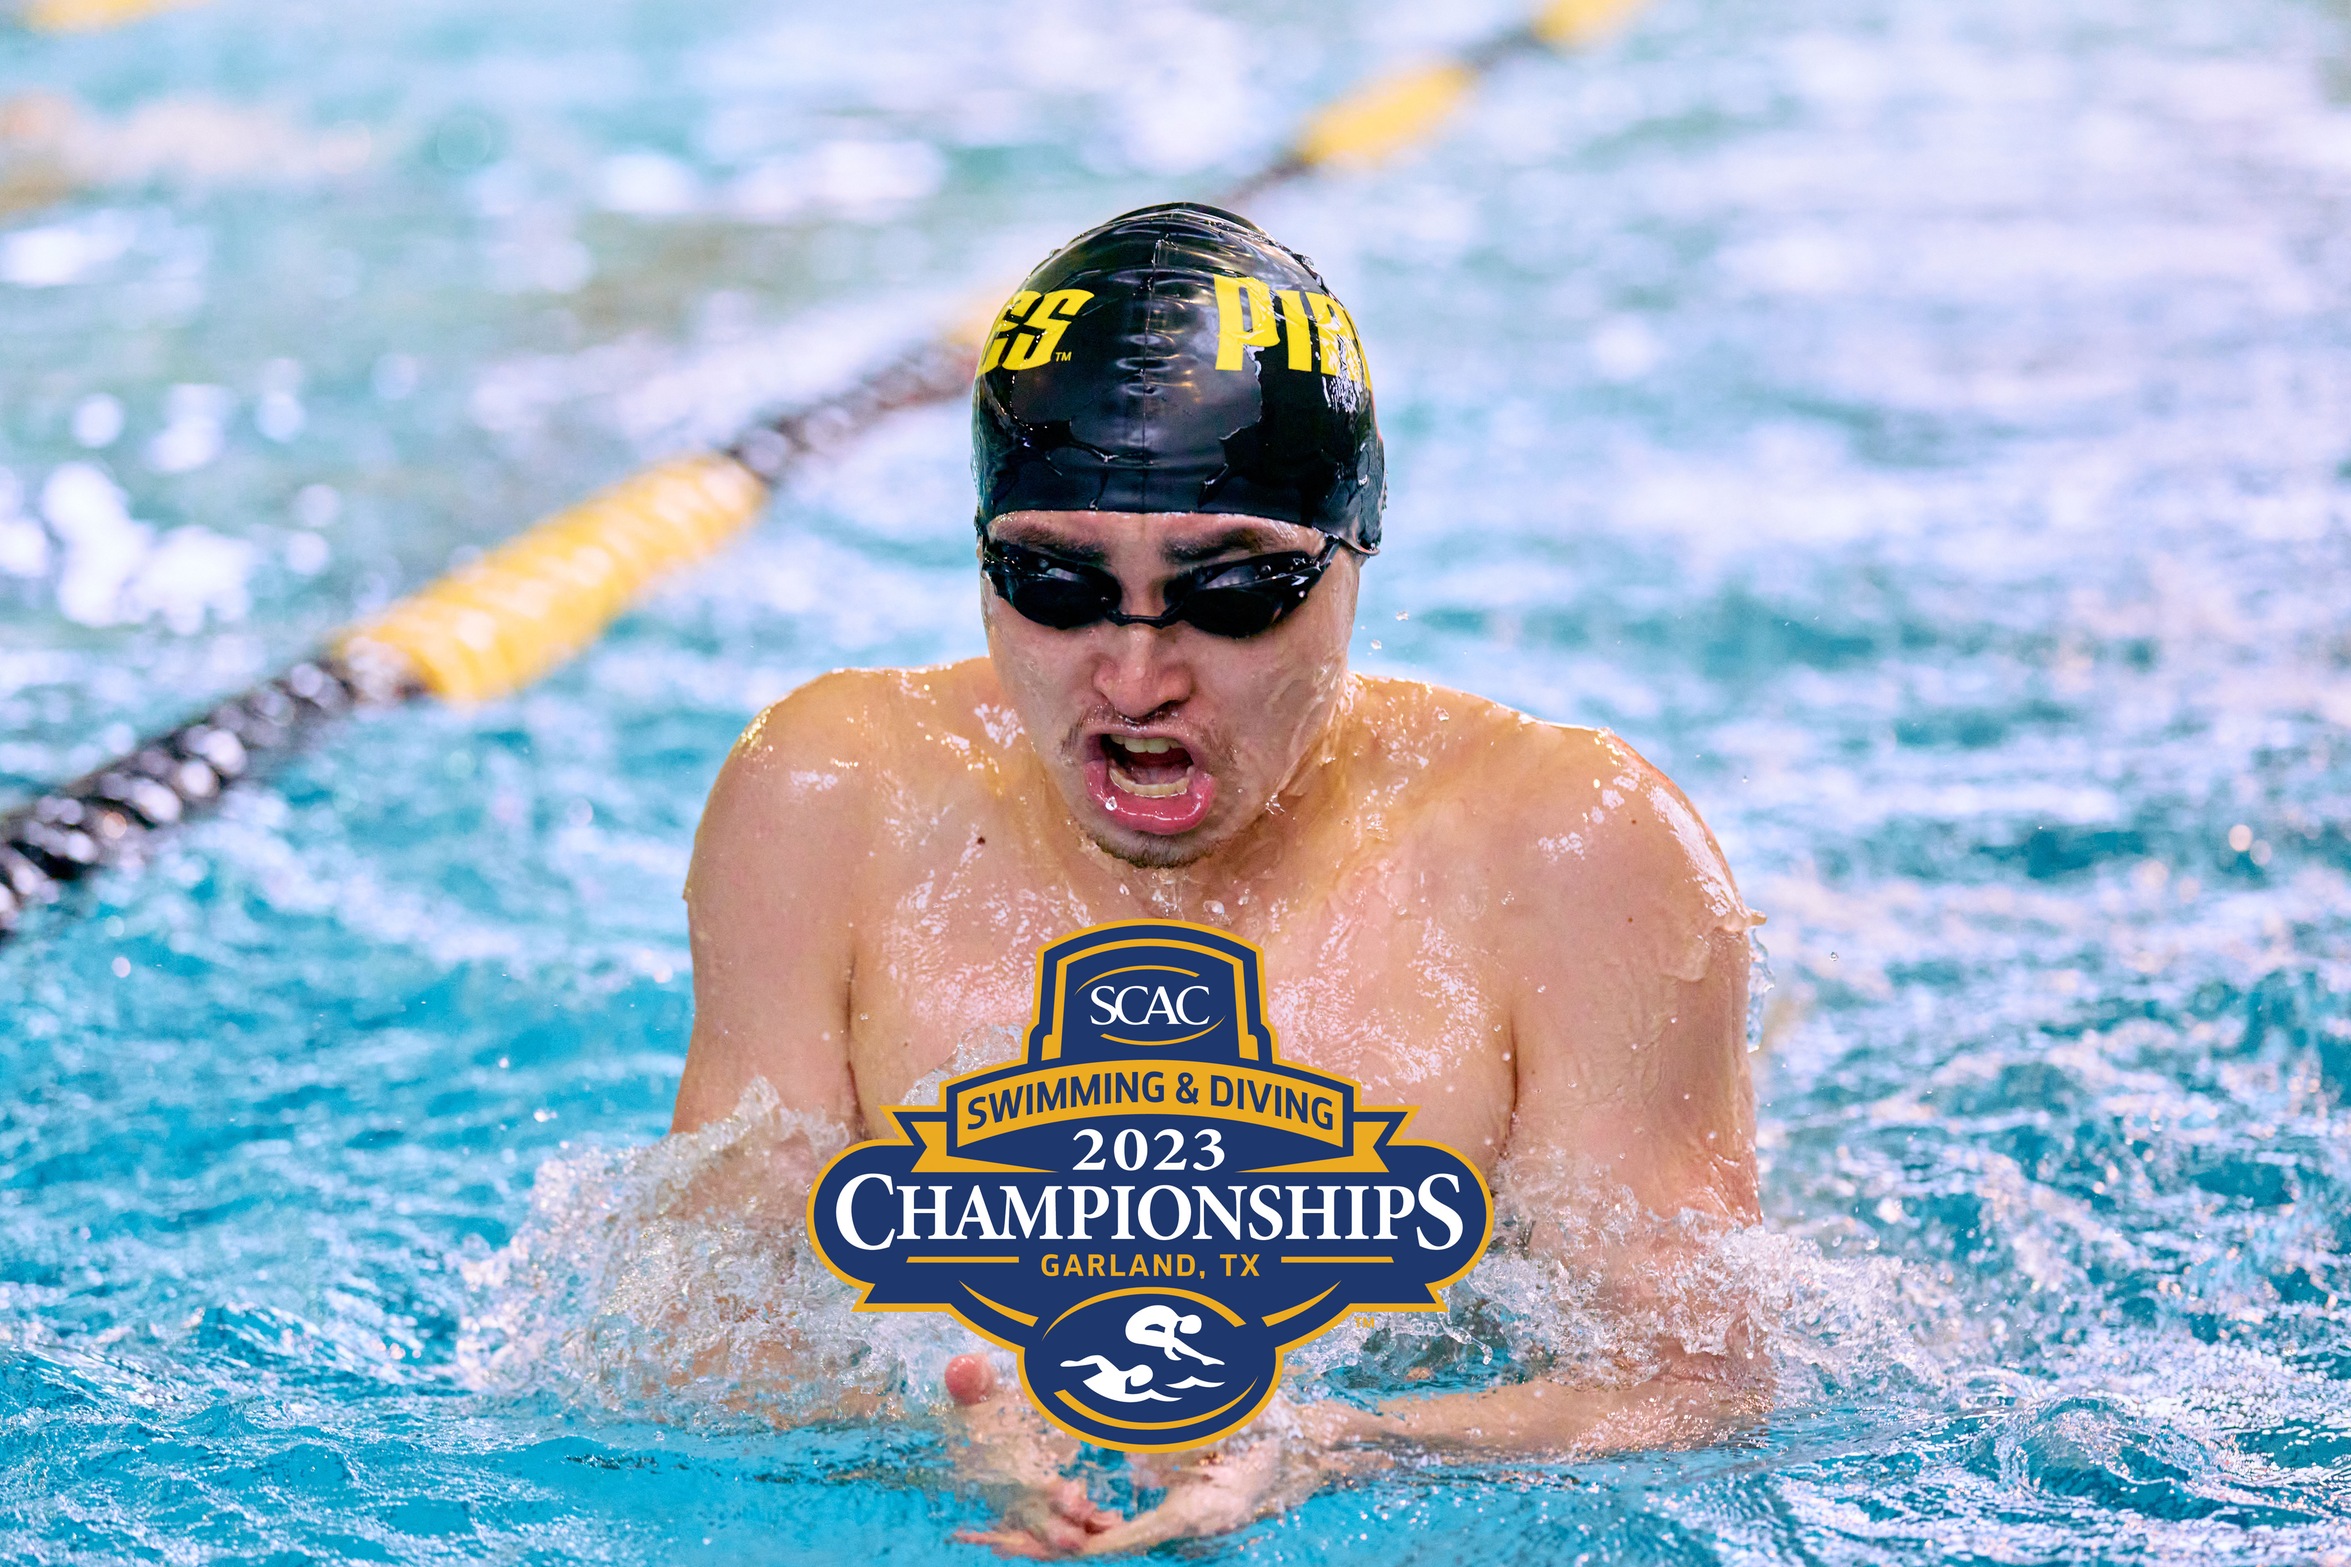 School Record Broken at Day 3 of SCAC Championships